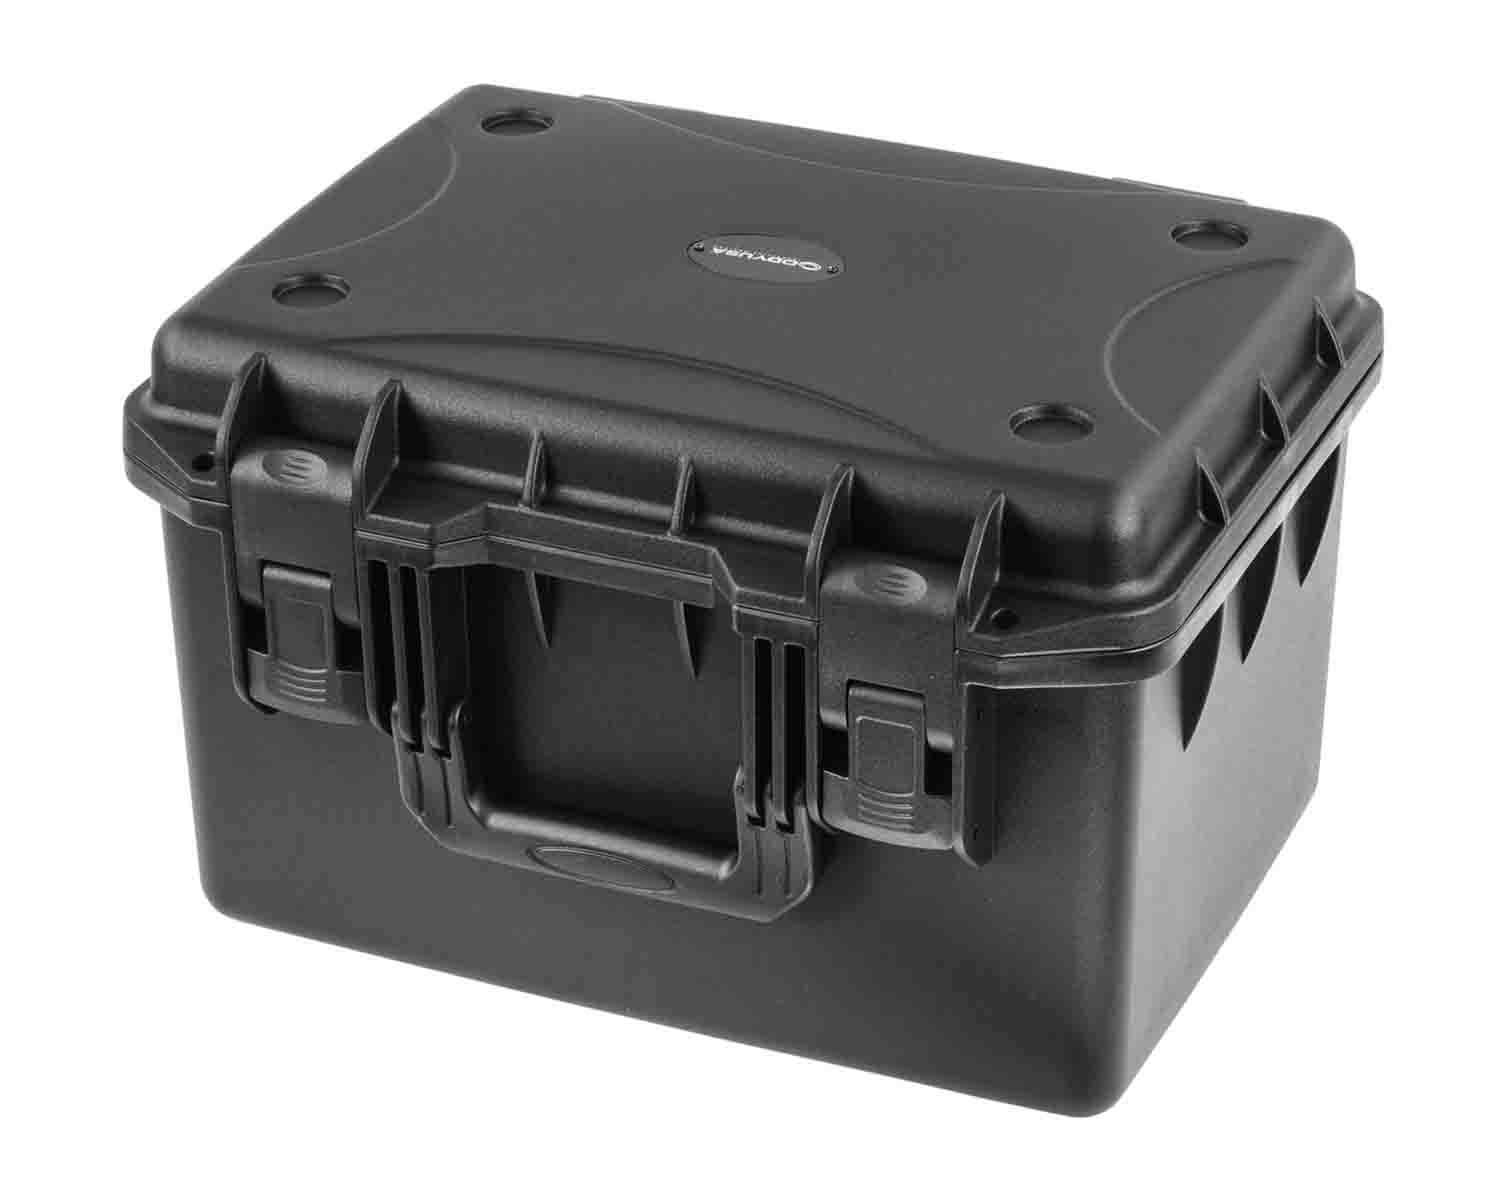 Odyssey VU151010 Vulcan Injection-Molded Utility Case with Pluck Foam - 15 x 10.5 x 8.25" Interior - Hollywood DJ